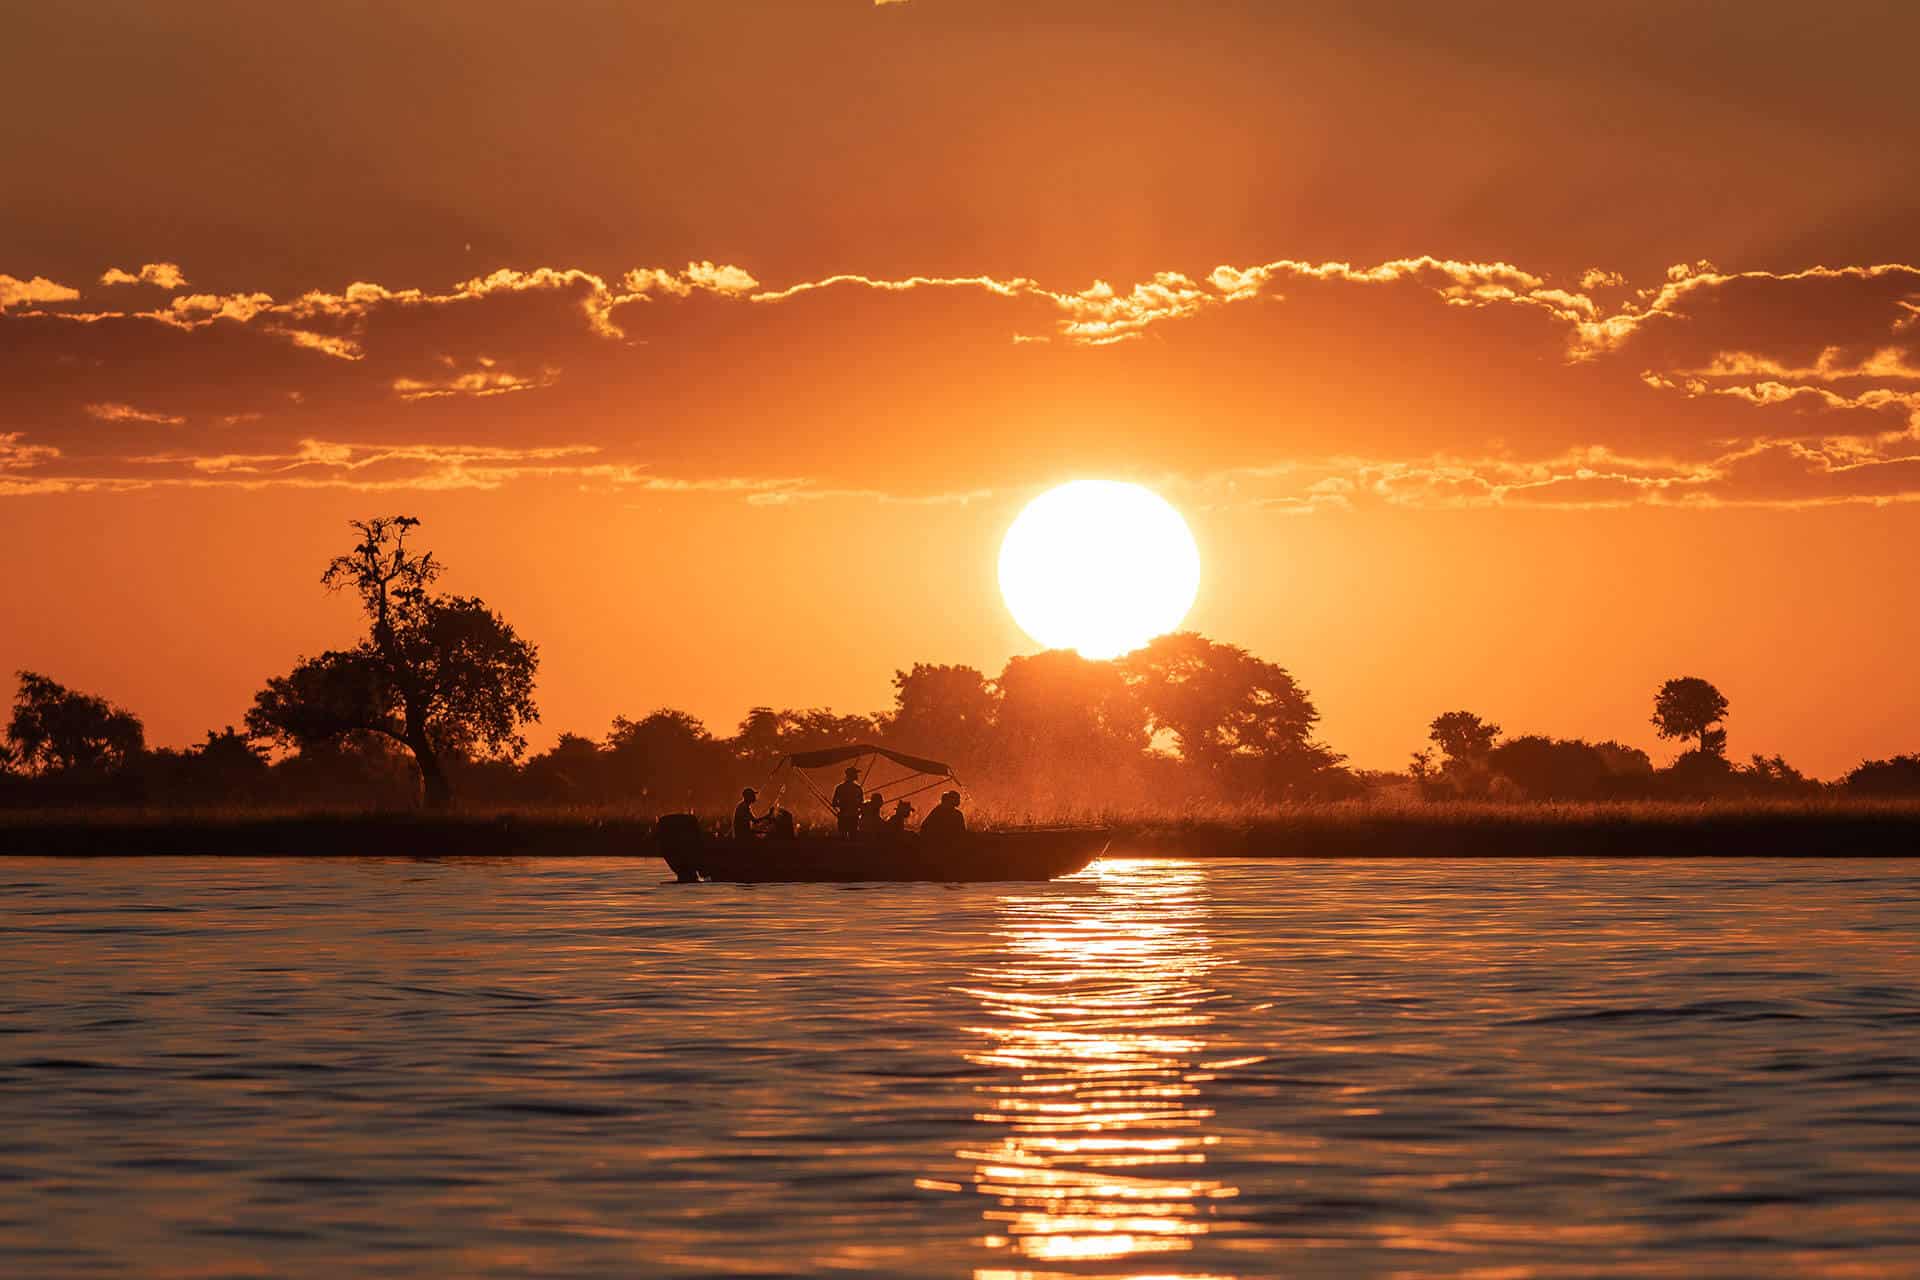 Sunset cruise on the Zambezi River- situated in one country's in the Africa travel restrictions Coronavirus information